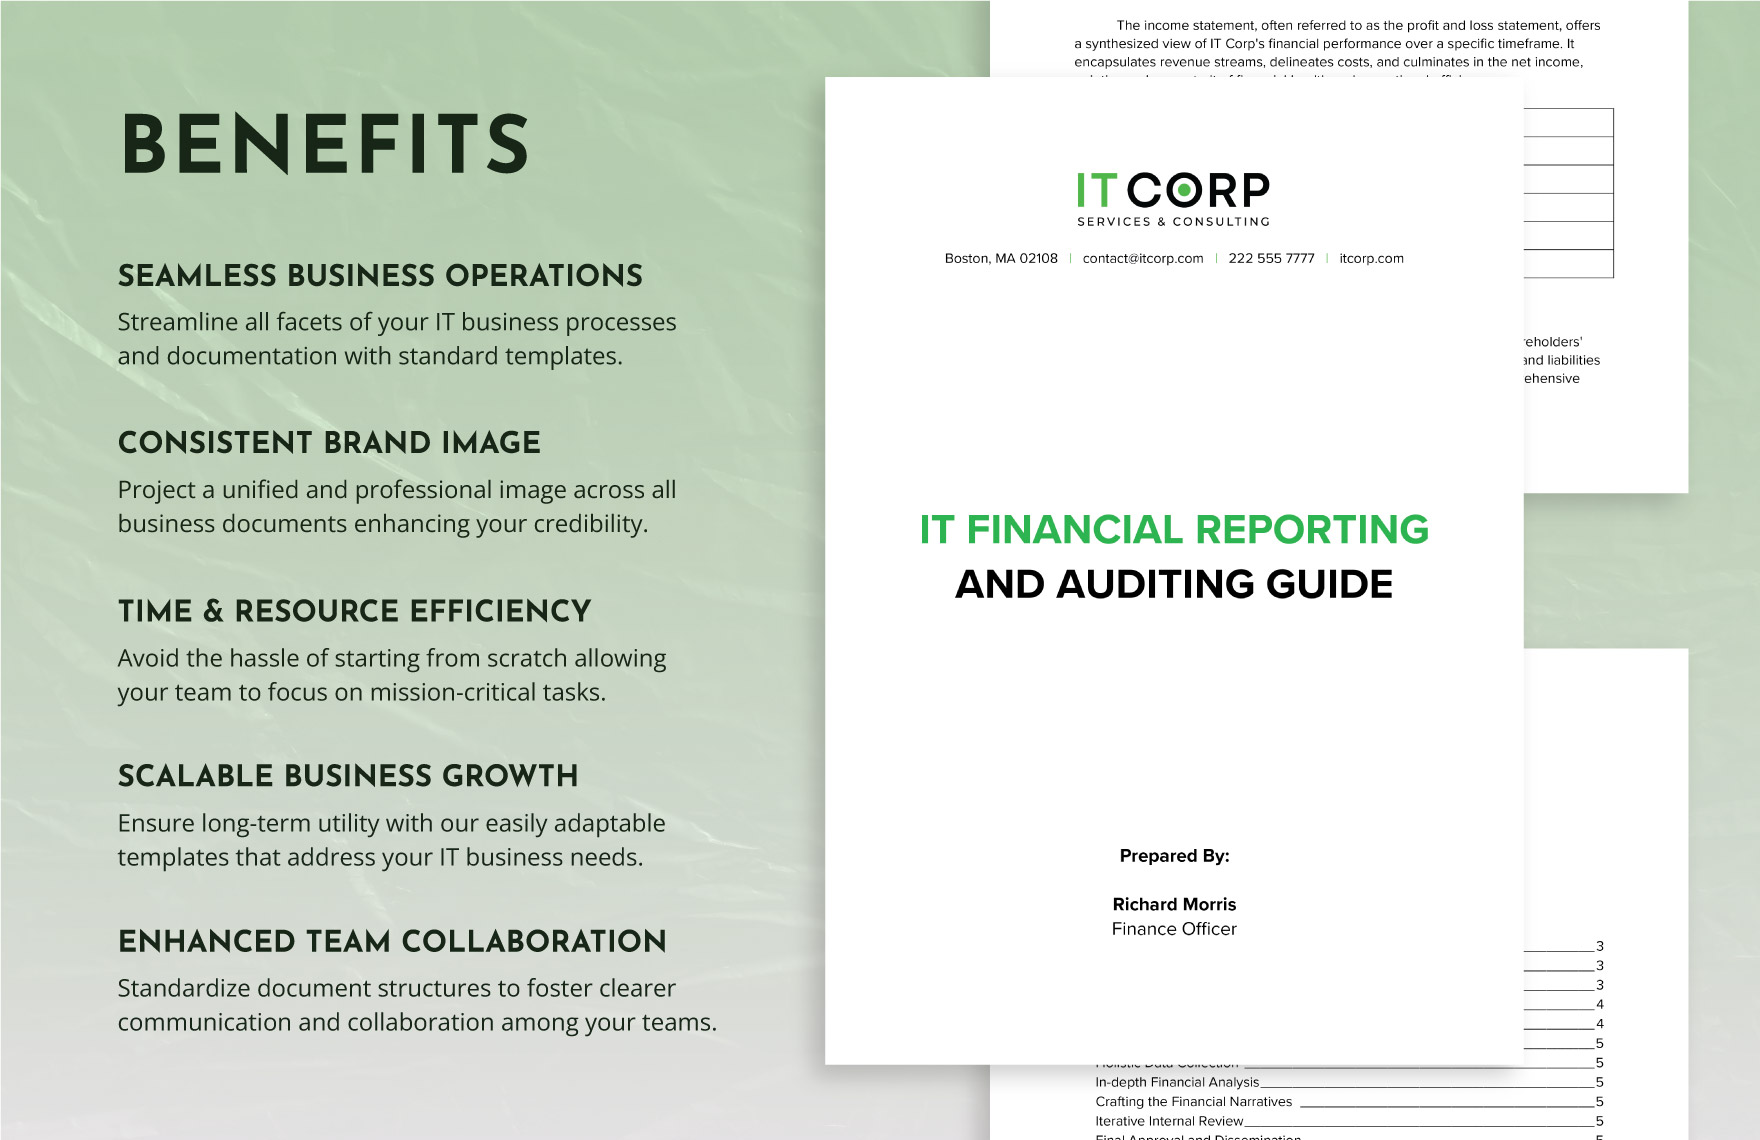 IT Financial Reporting and Auditing Guide Template